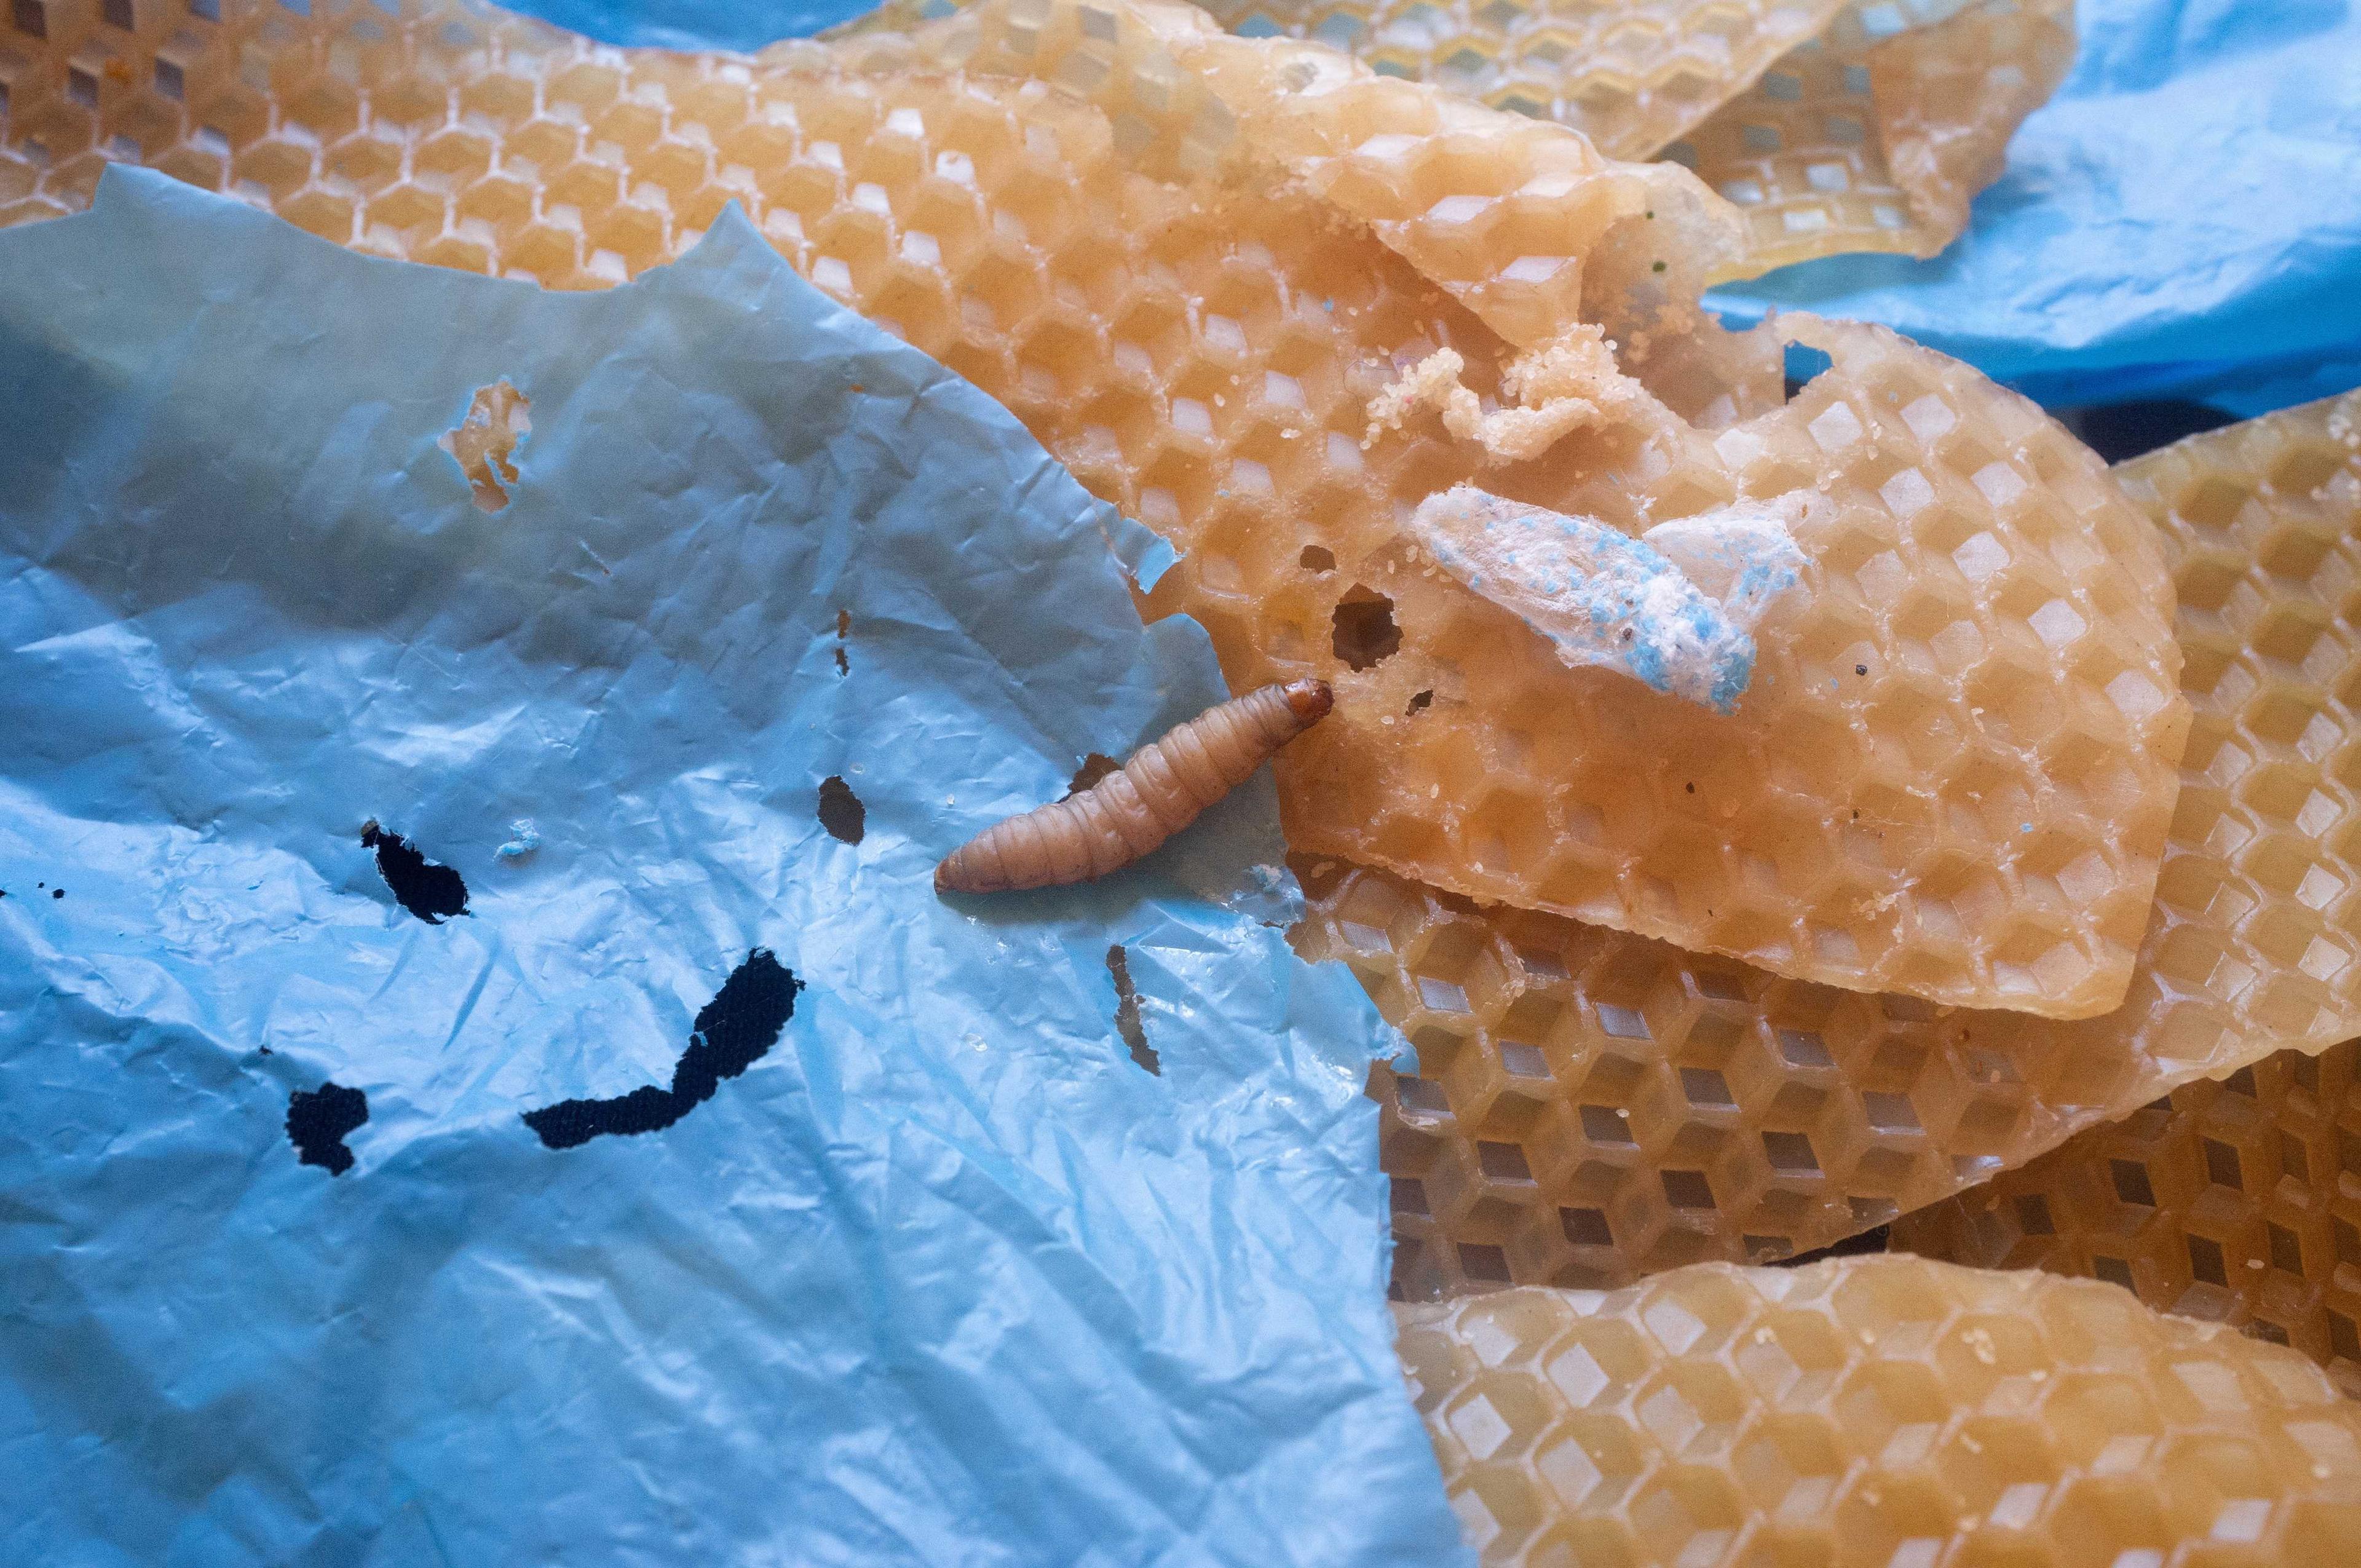 A wax worm, moth larva that eats wax made by bees to build honeycombs, is seen in a laboratory at the Spanish National Research Council in Madrid, Spain in this undated handout photograph obtained by Reuters on Oct 4. Photo: Reuters